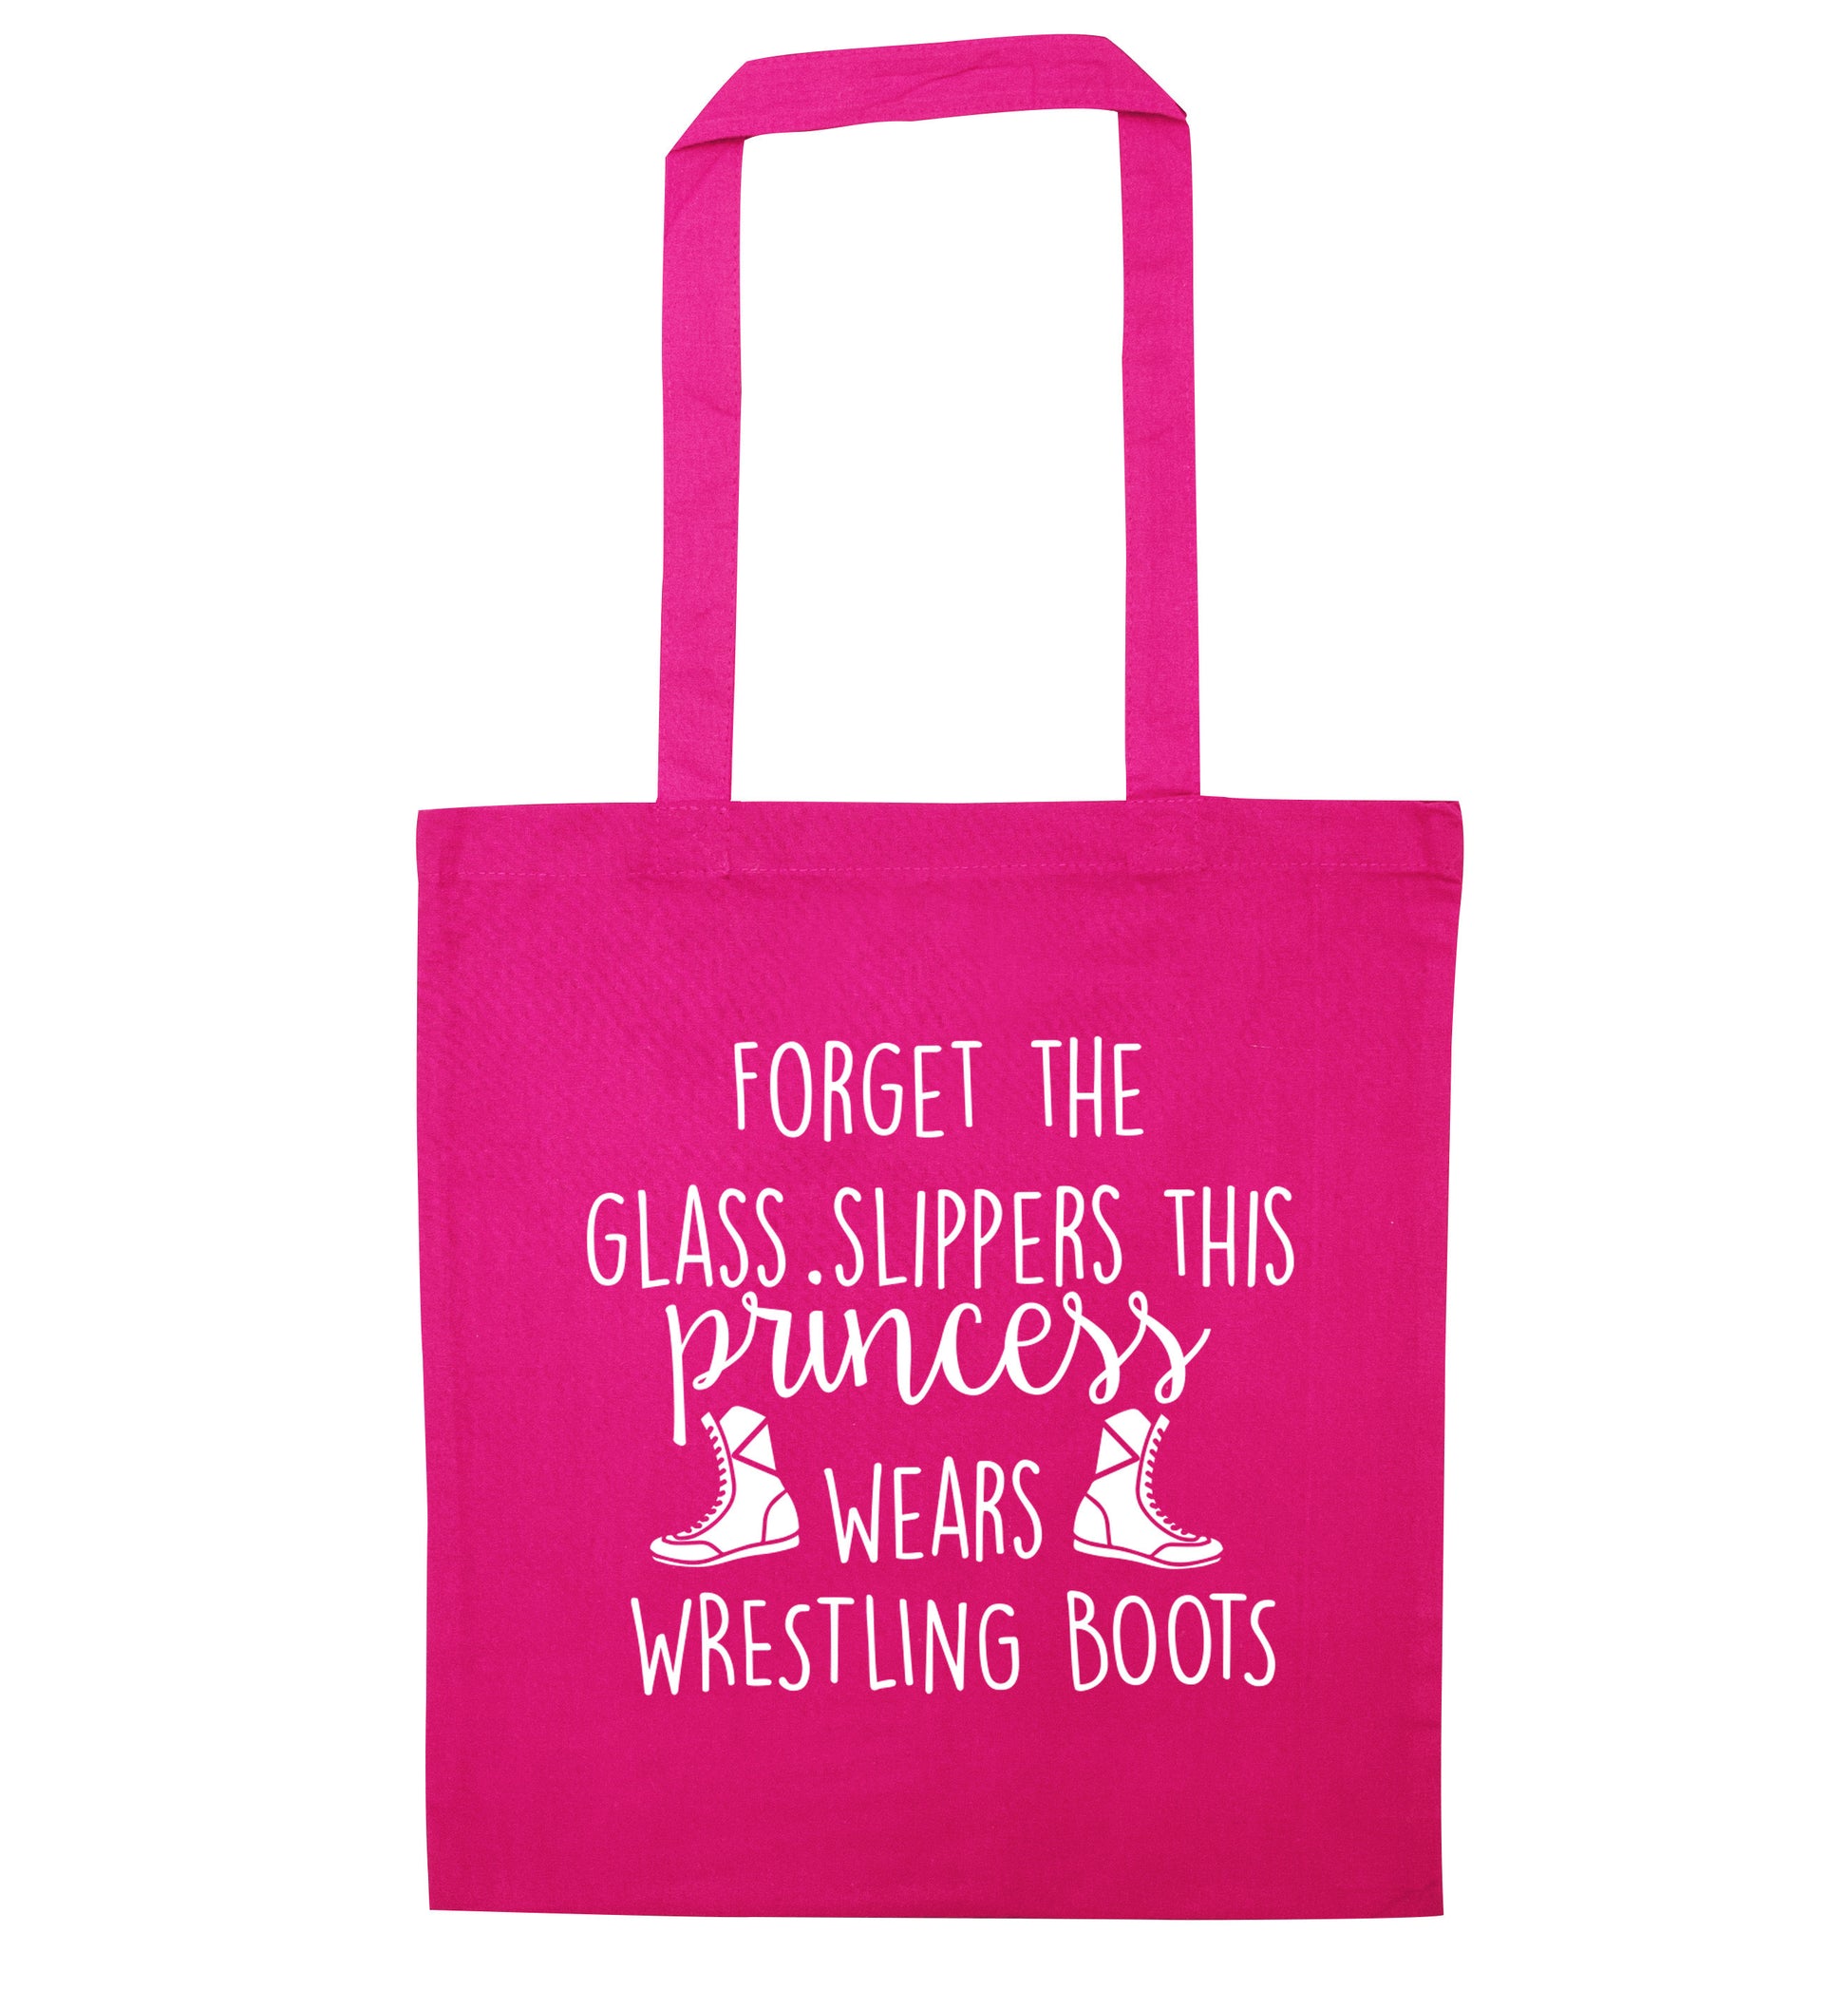 Forget the glass slippers this princess wears wrestling boots pink tote bag